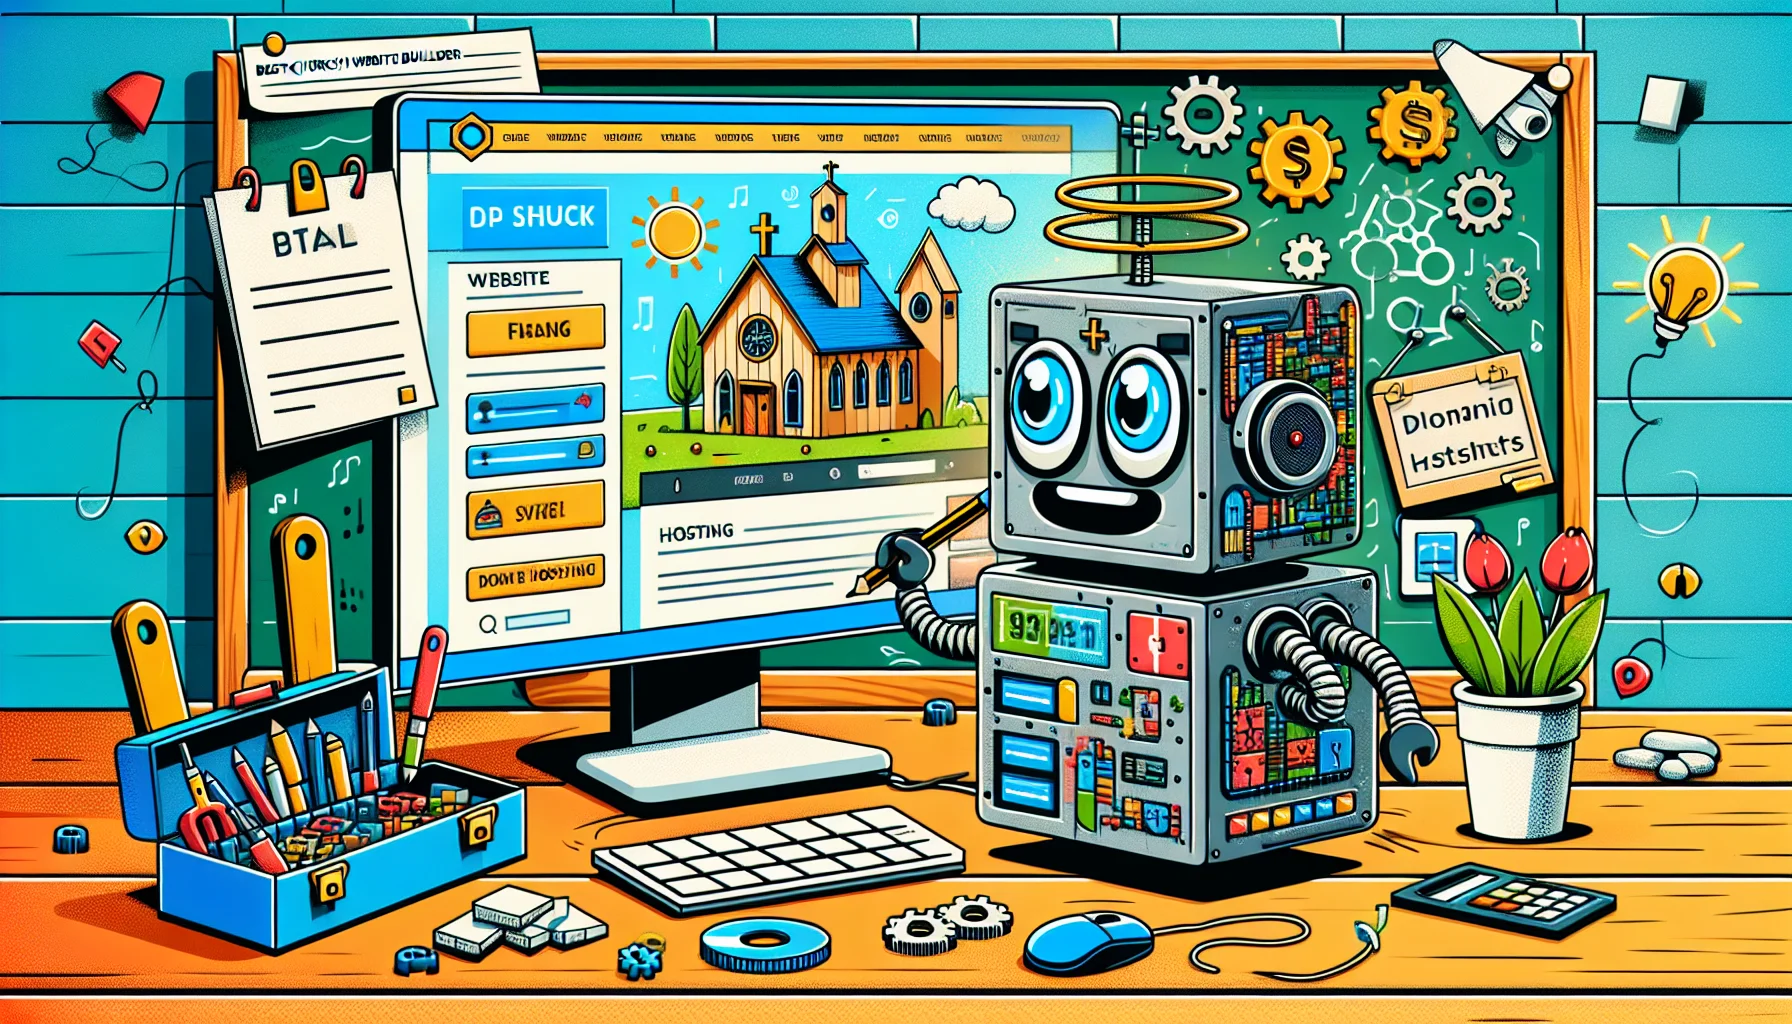 Create an image that humorously represents the best church website builder. Visualize a scene where a friendly-looking robot coded with religious symbols is diligently constructing a detailed website layout on a computer screen. The website is filled with features that indicate it's designed for a church, like a donation button and a schedule for services. The robot appears excited, focused on its task with gears turning swiftly. An open toolbox nearby is filled with web hosting tools signifying stellar hosting capabilities. The setting is vibrant, symbolic of a user-friendly environment.